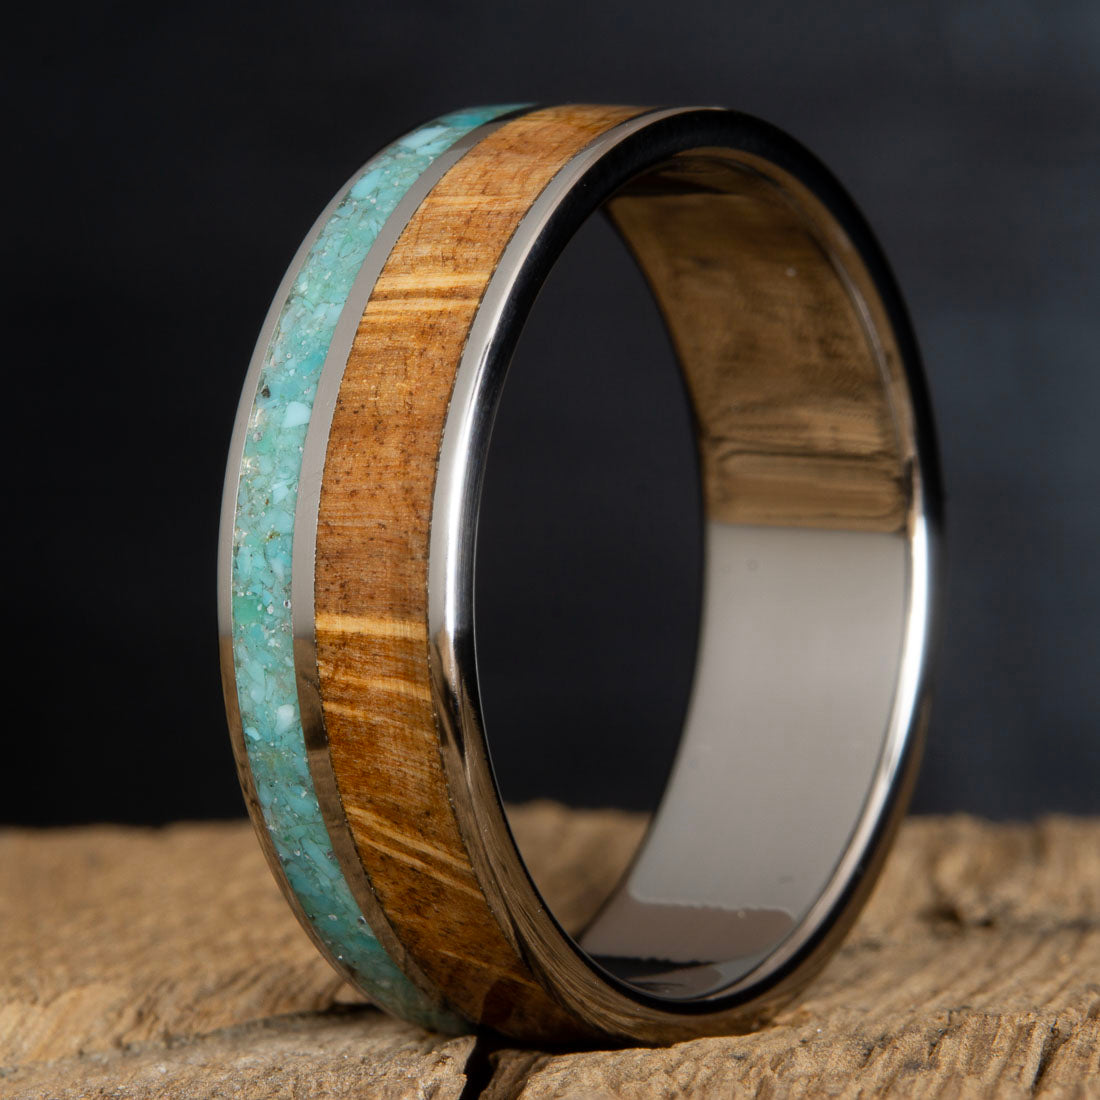 Mens wood inlay ring with oak burl wood and turquoise